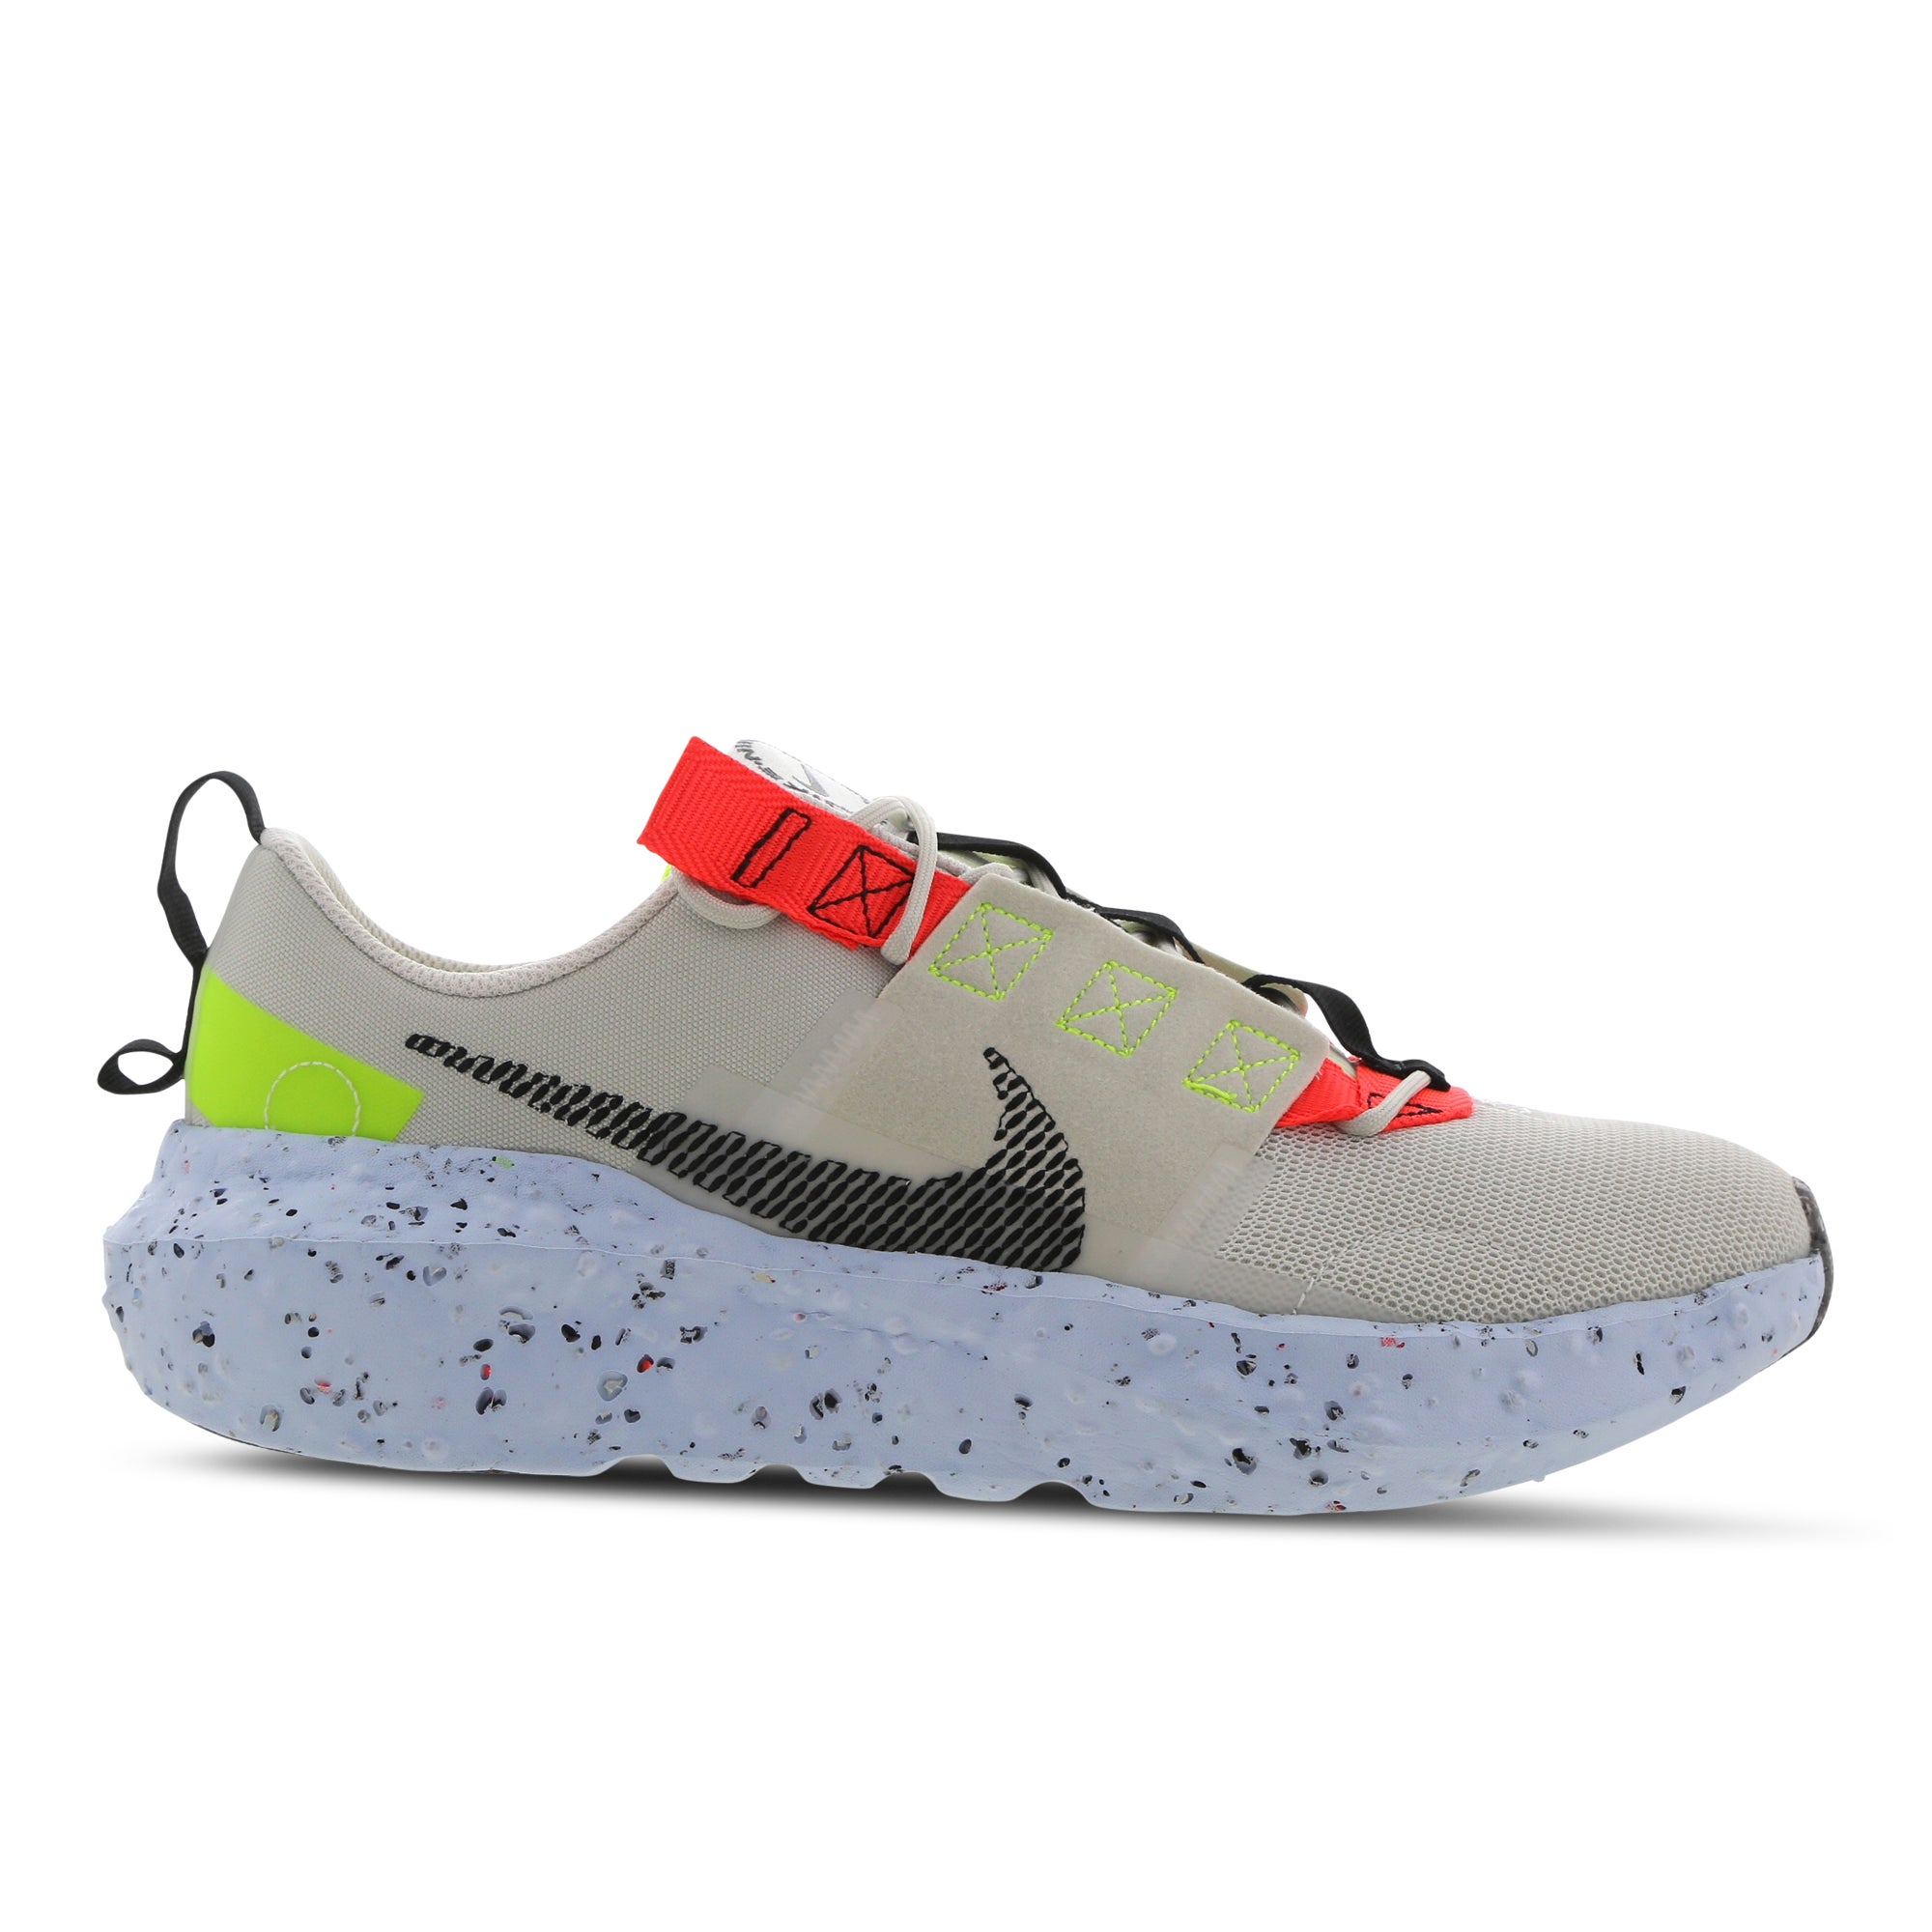 Nike Crater Impact Shoes